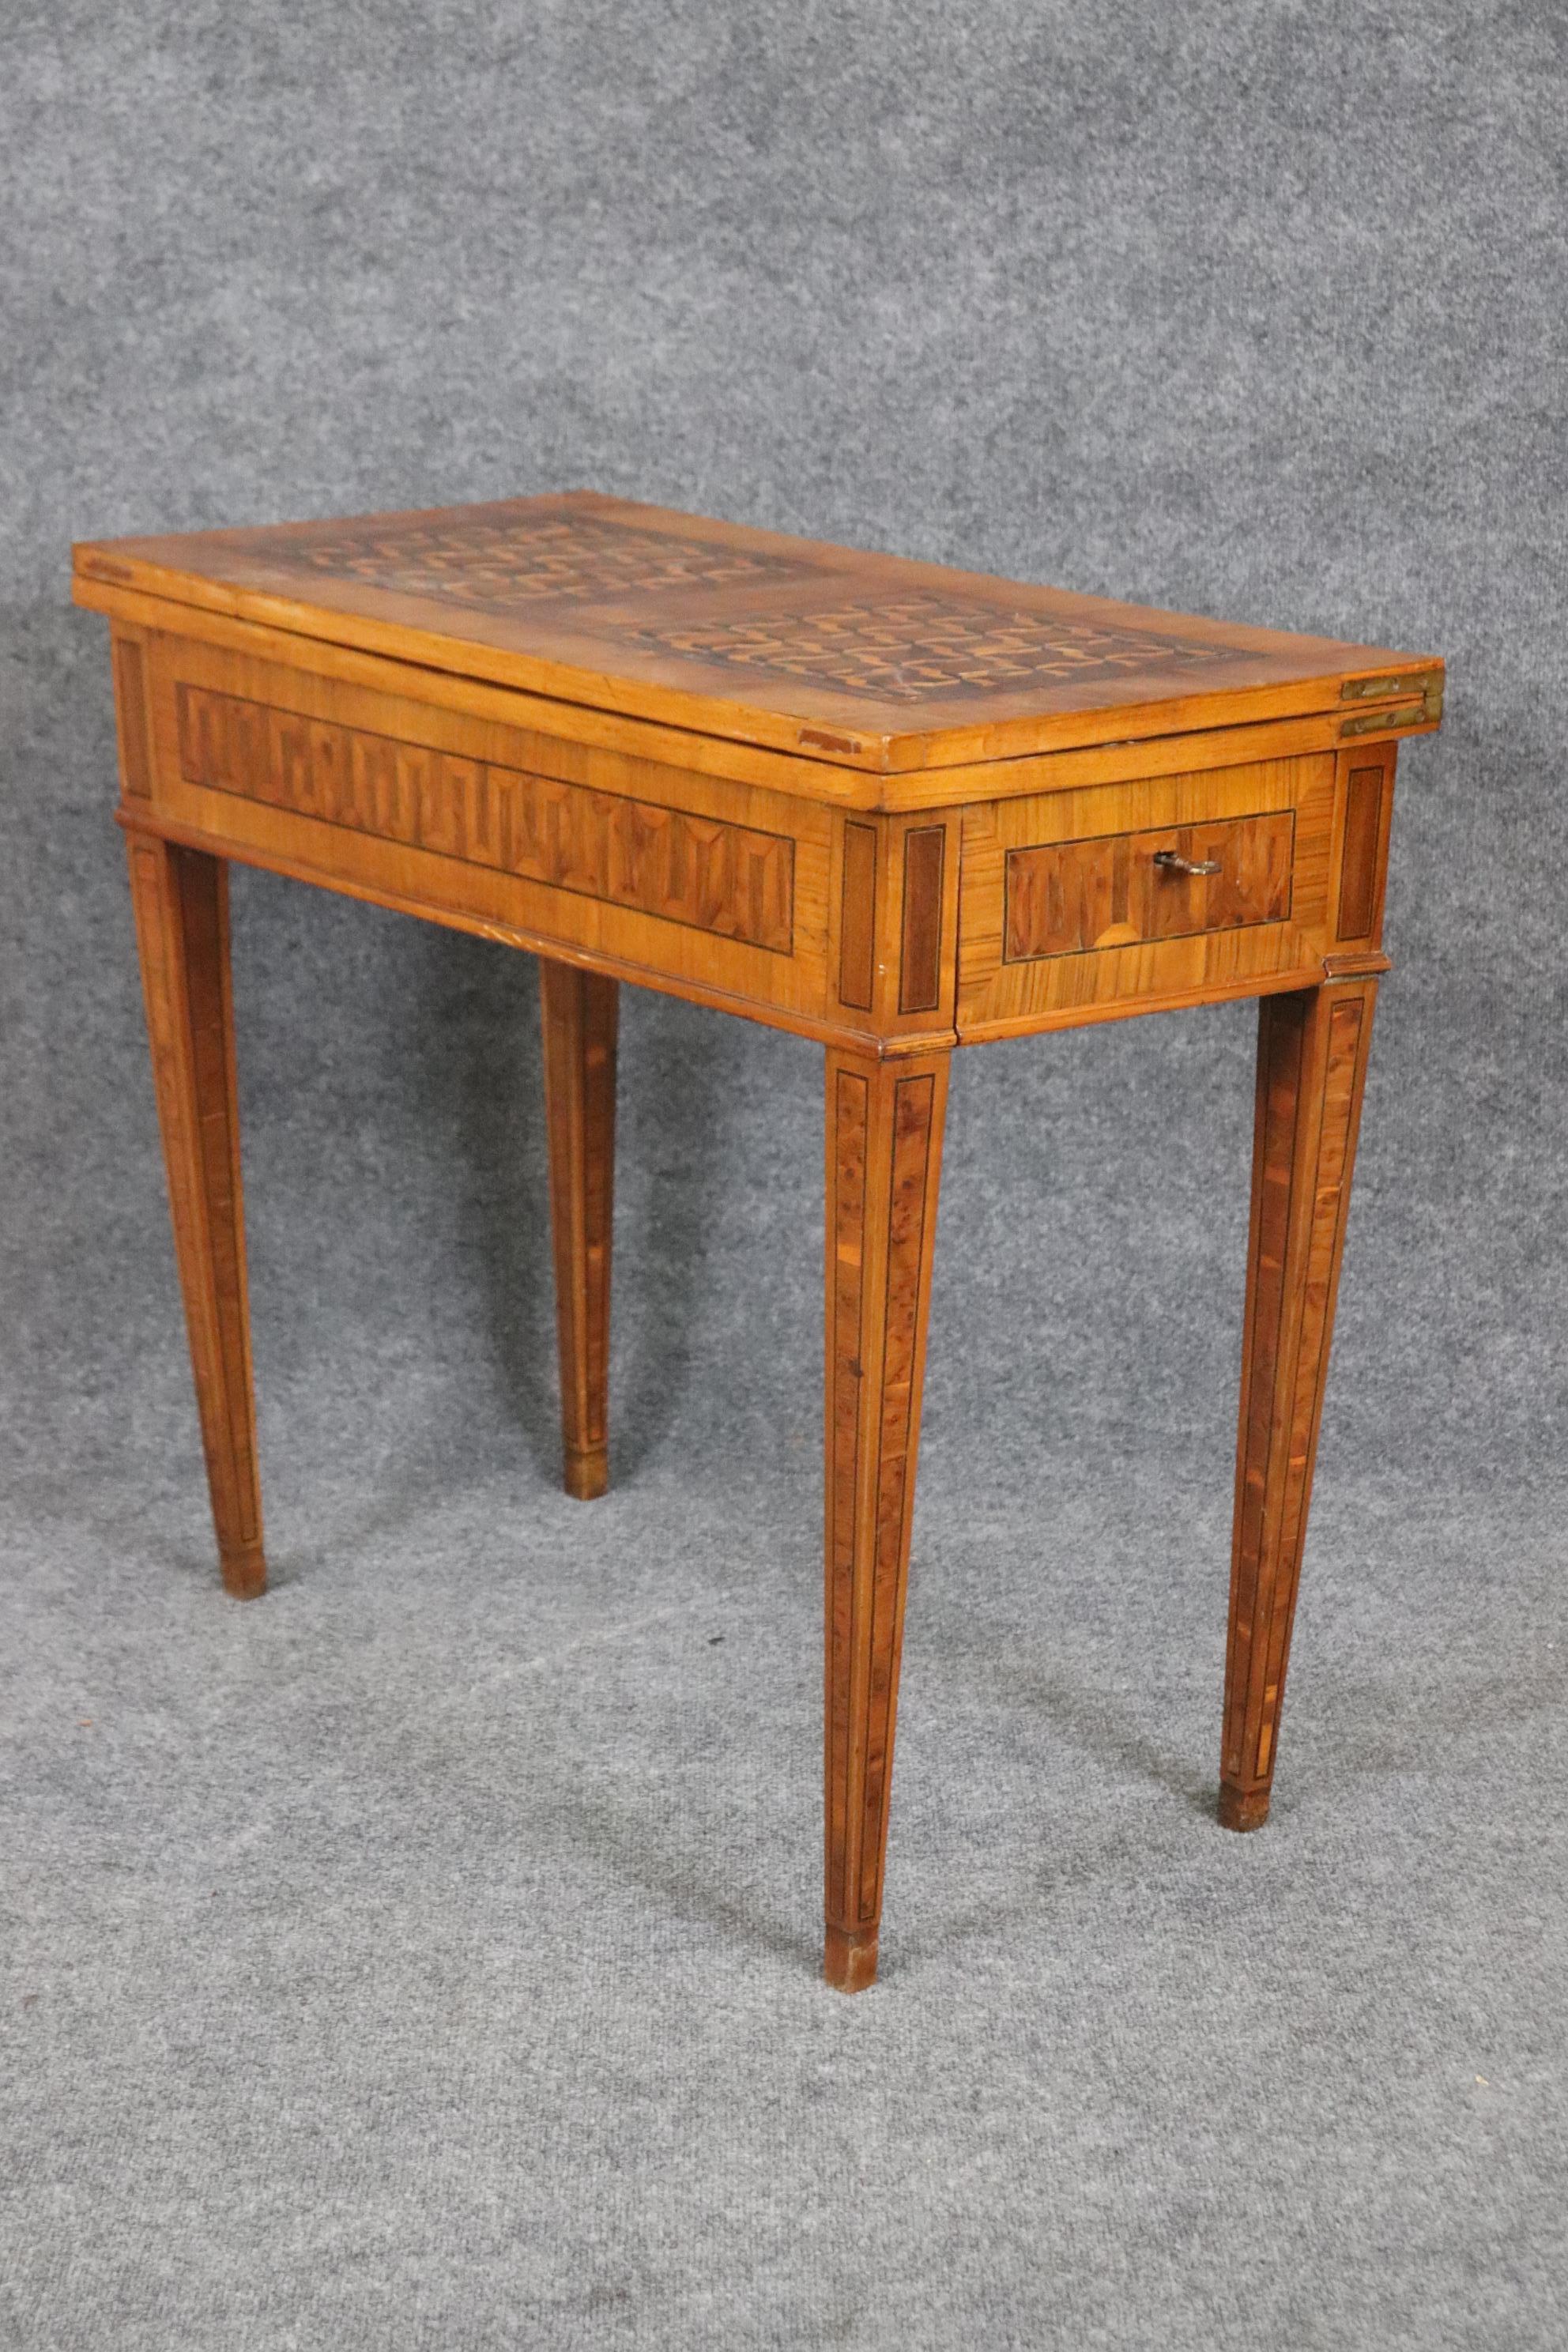 Rare Italian Inlaid 18th Century Olivewood and Rosewood Games Table Circa 1780 For Sale 2